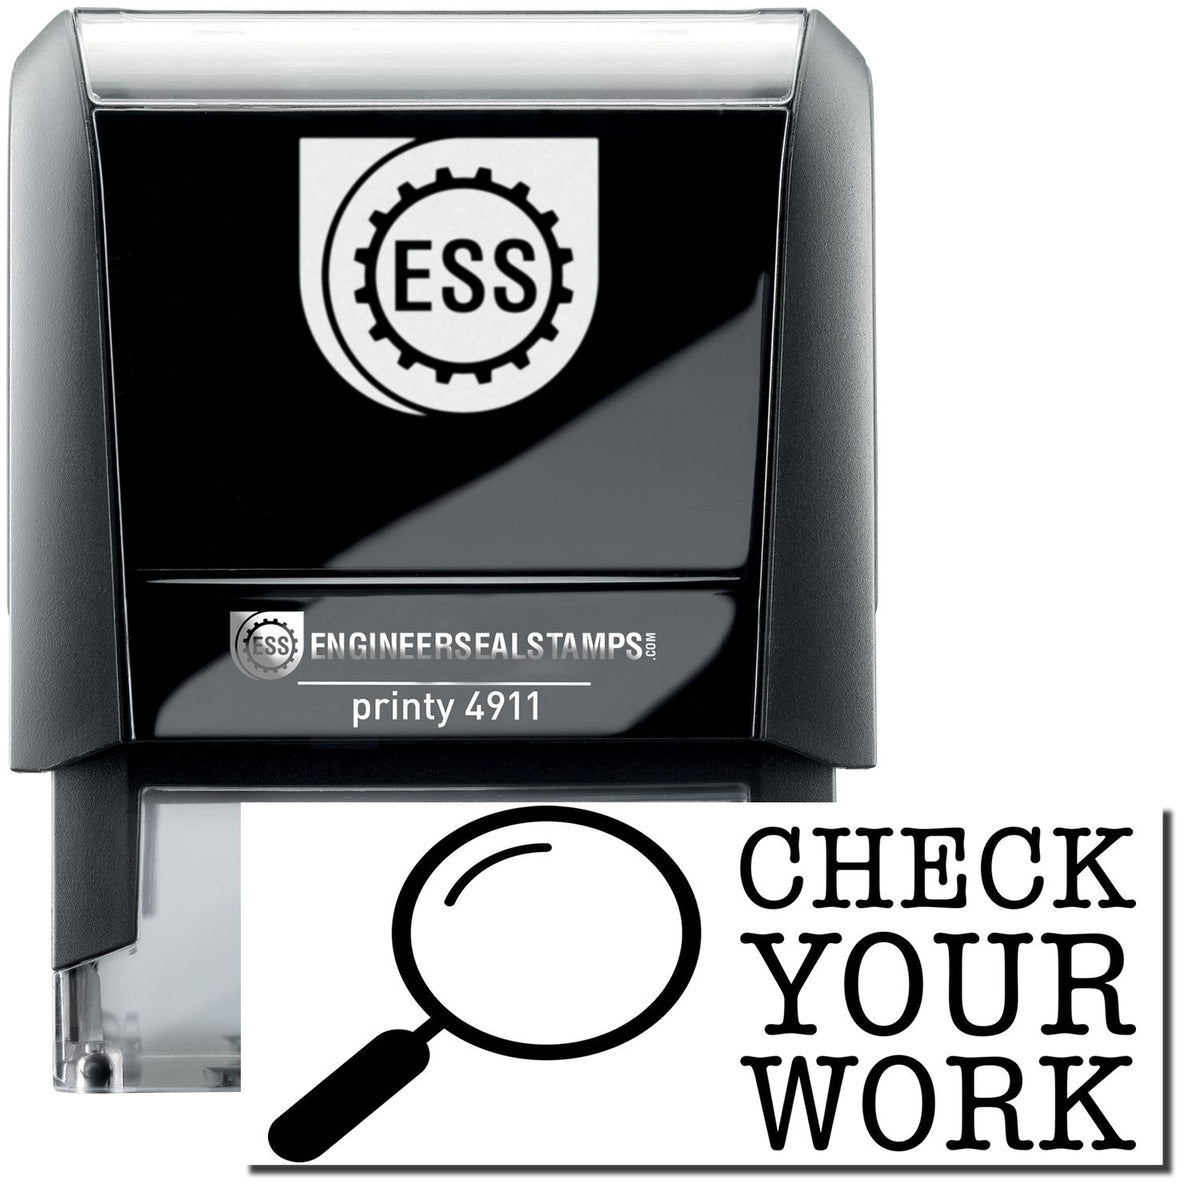 A self-inking stamp with a stamped image showing how the text &quot;CHECK YOUR WORK&quot; (with an image of a magnifying glass on the left side) is displayed after stamping.